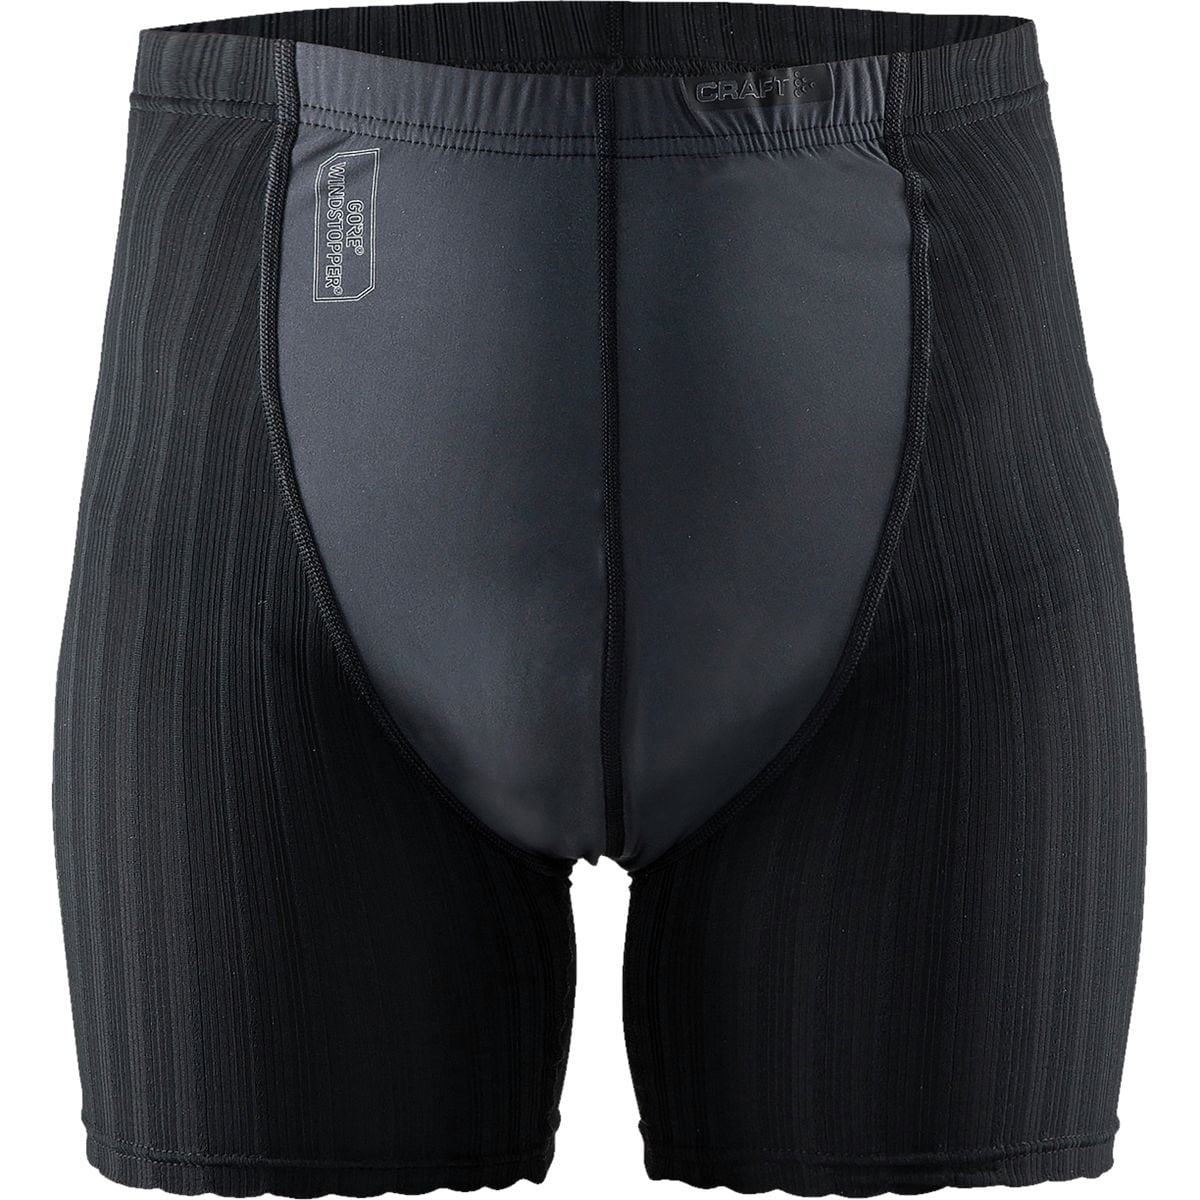 Craft Active Extreme 2.0 Windstopper Boxers Men's